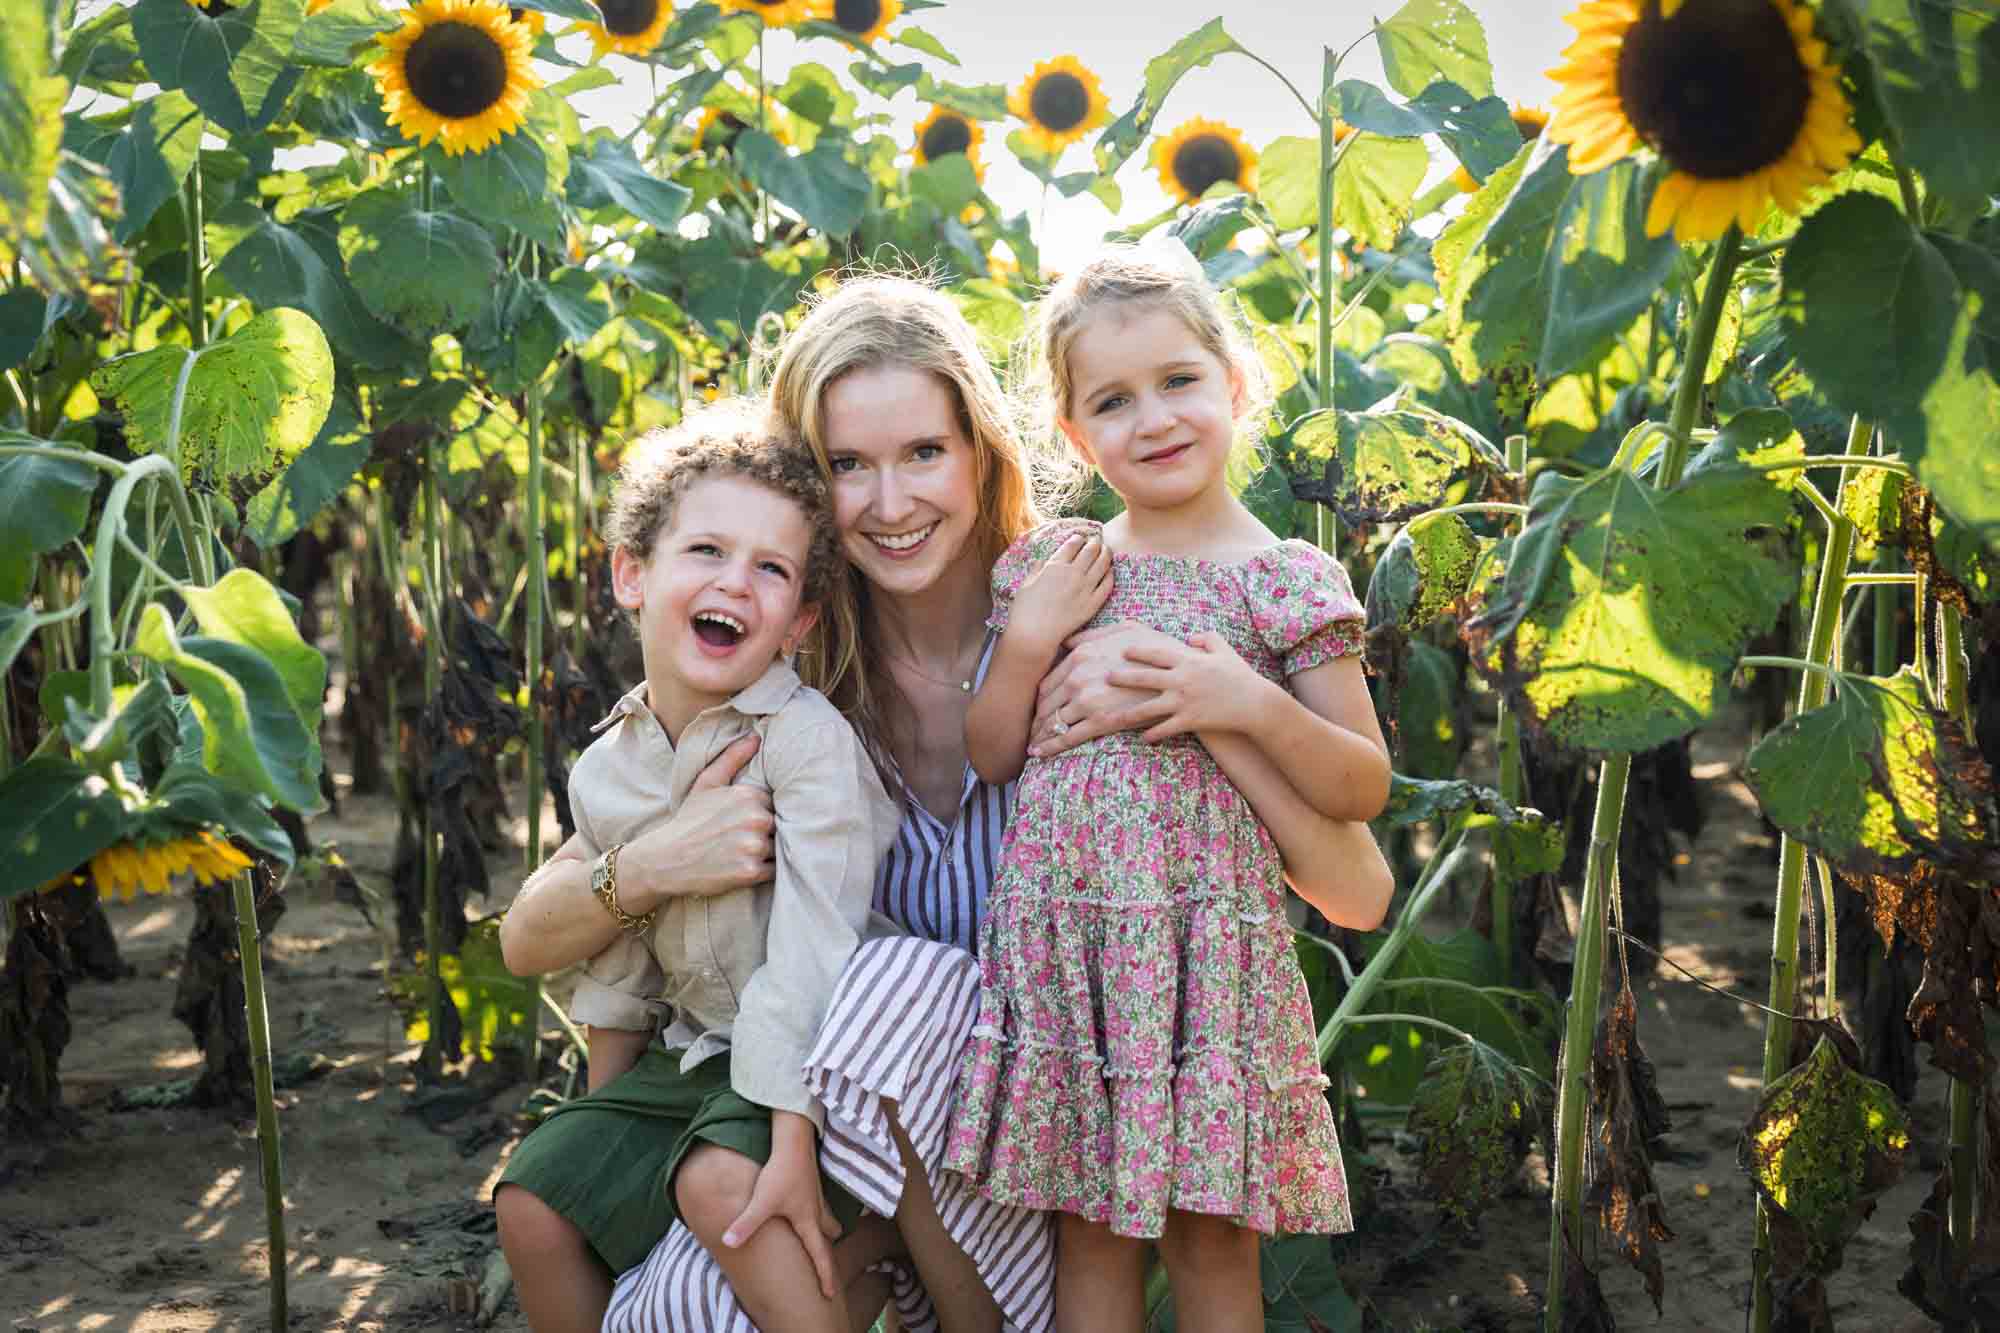 Mother hugging two small children in sunflower patch